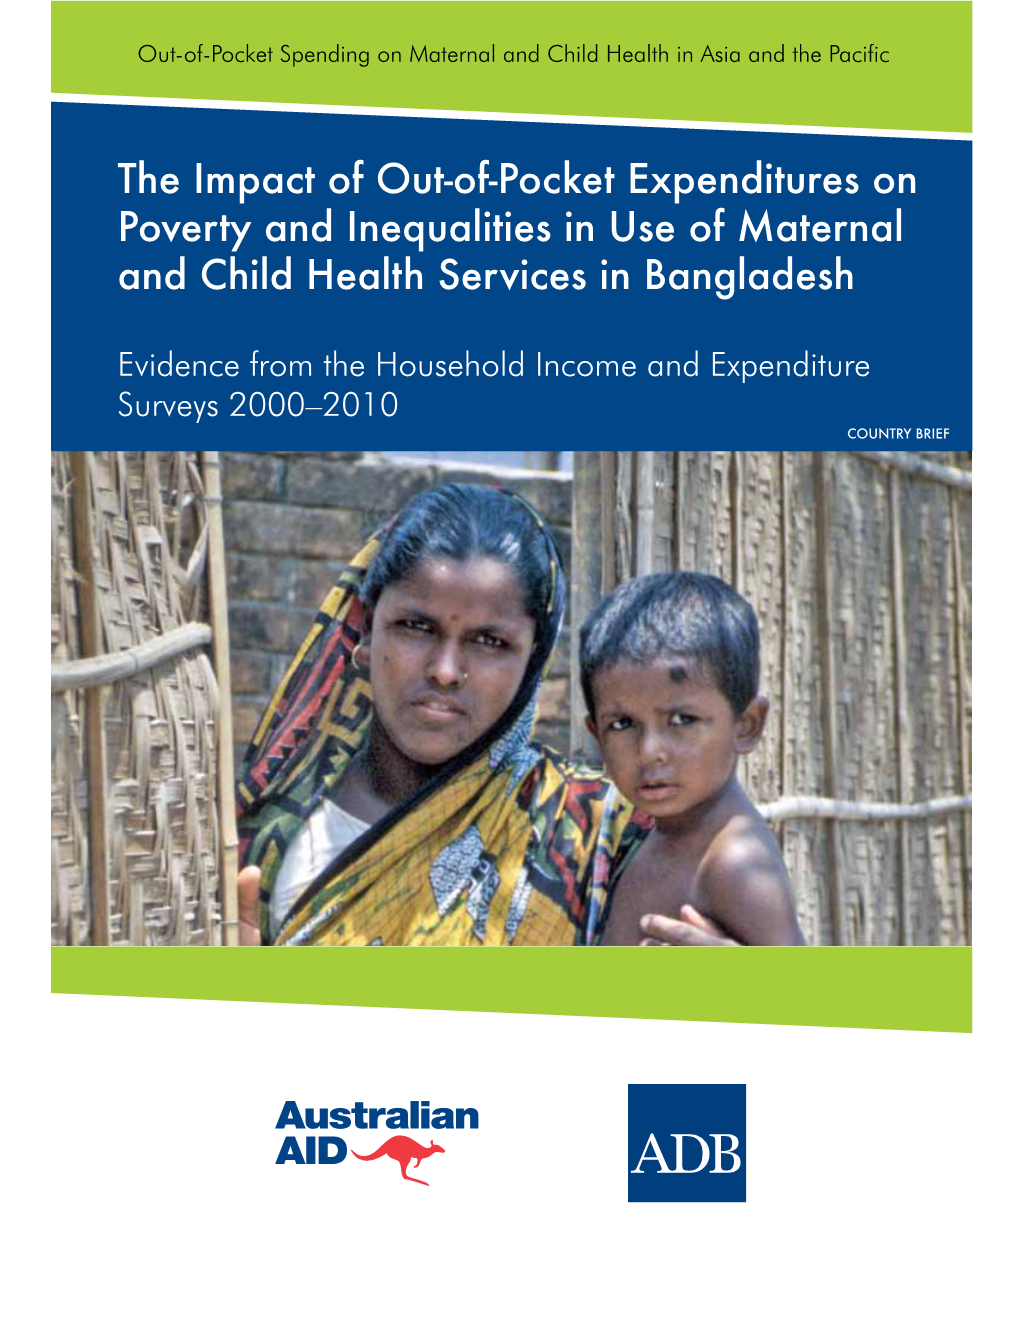 The Impact of Out-Of-Pocket Expenditures on Poverty and Inequalities in Use of Maternal and Child Health Services in Bangladesh